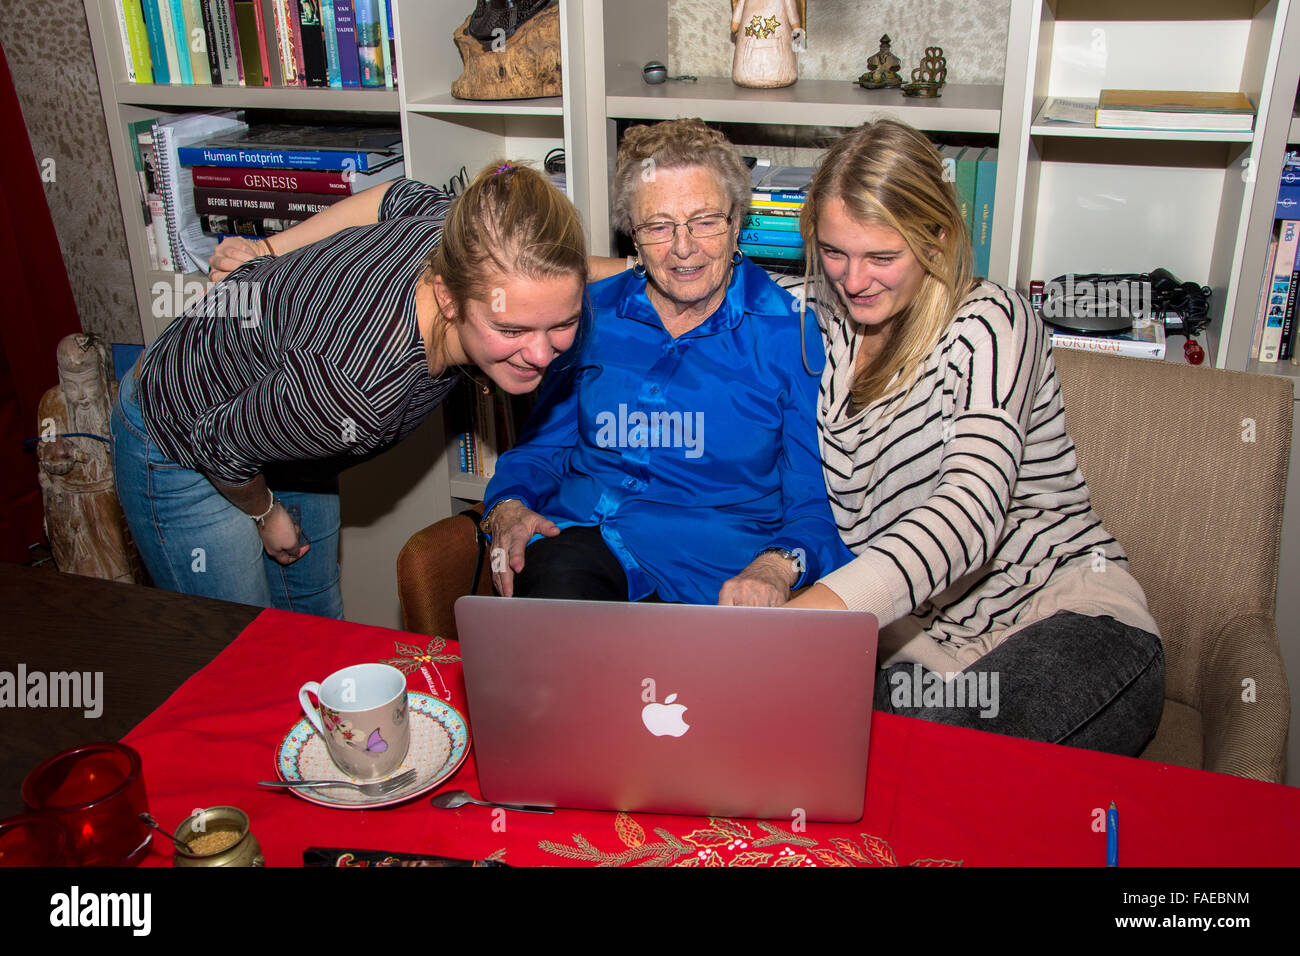 grandmother and grandchild looking at macbook computer Stock Photo